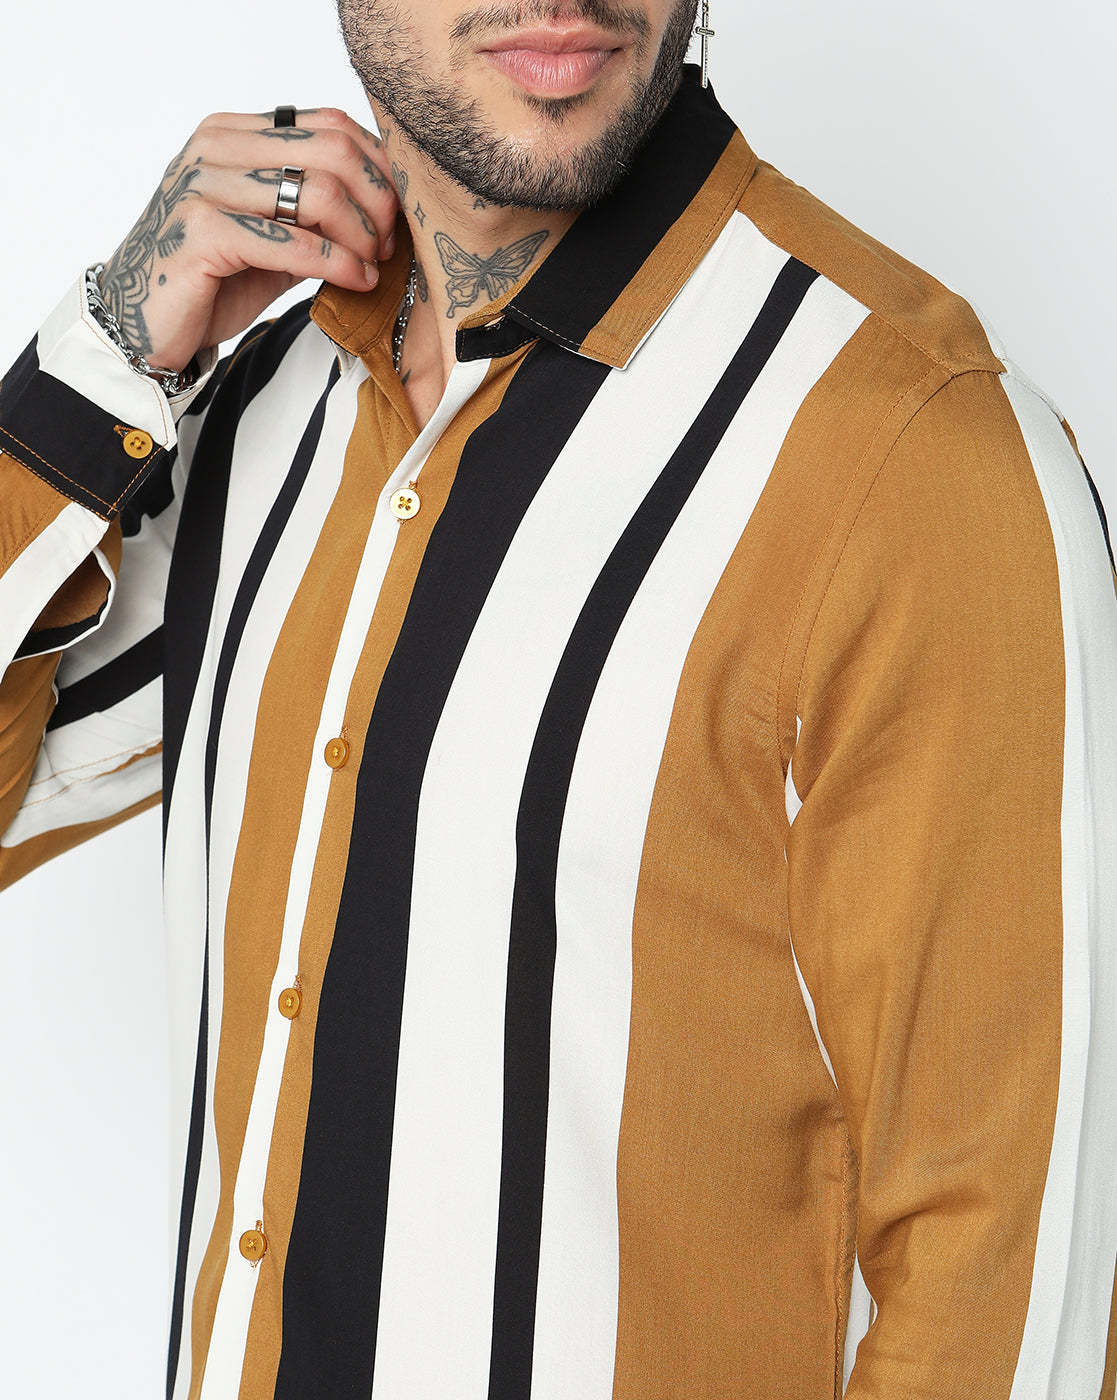 Ochre Yellow and White Bengal Stripes Rayon Full Sleeve Shirt